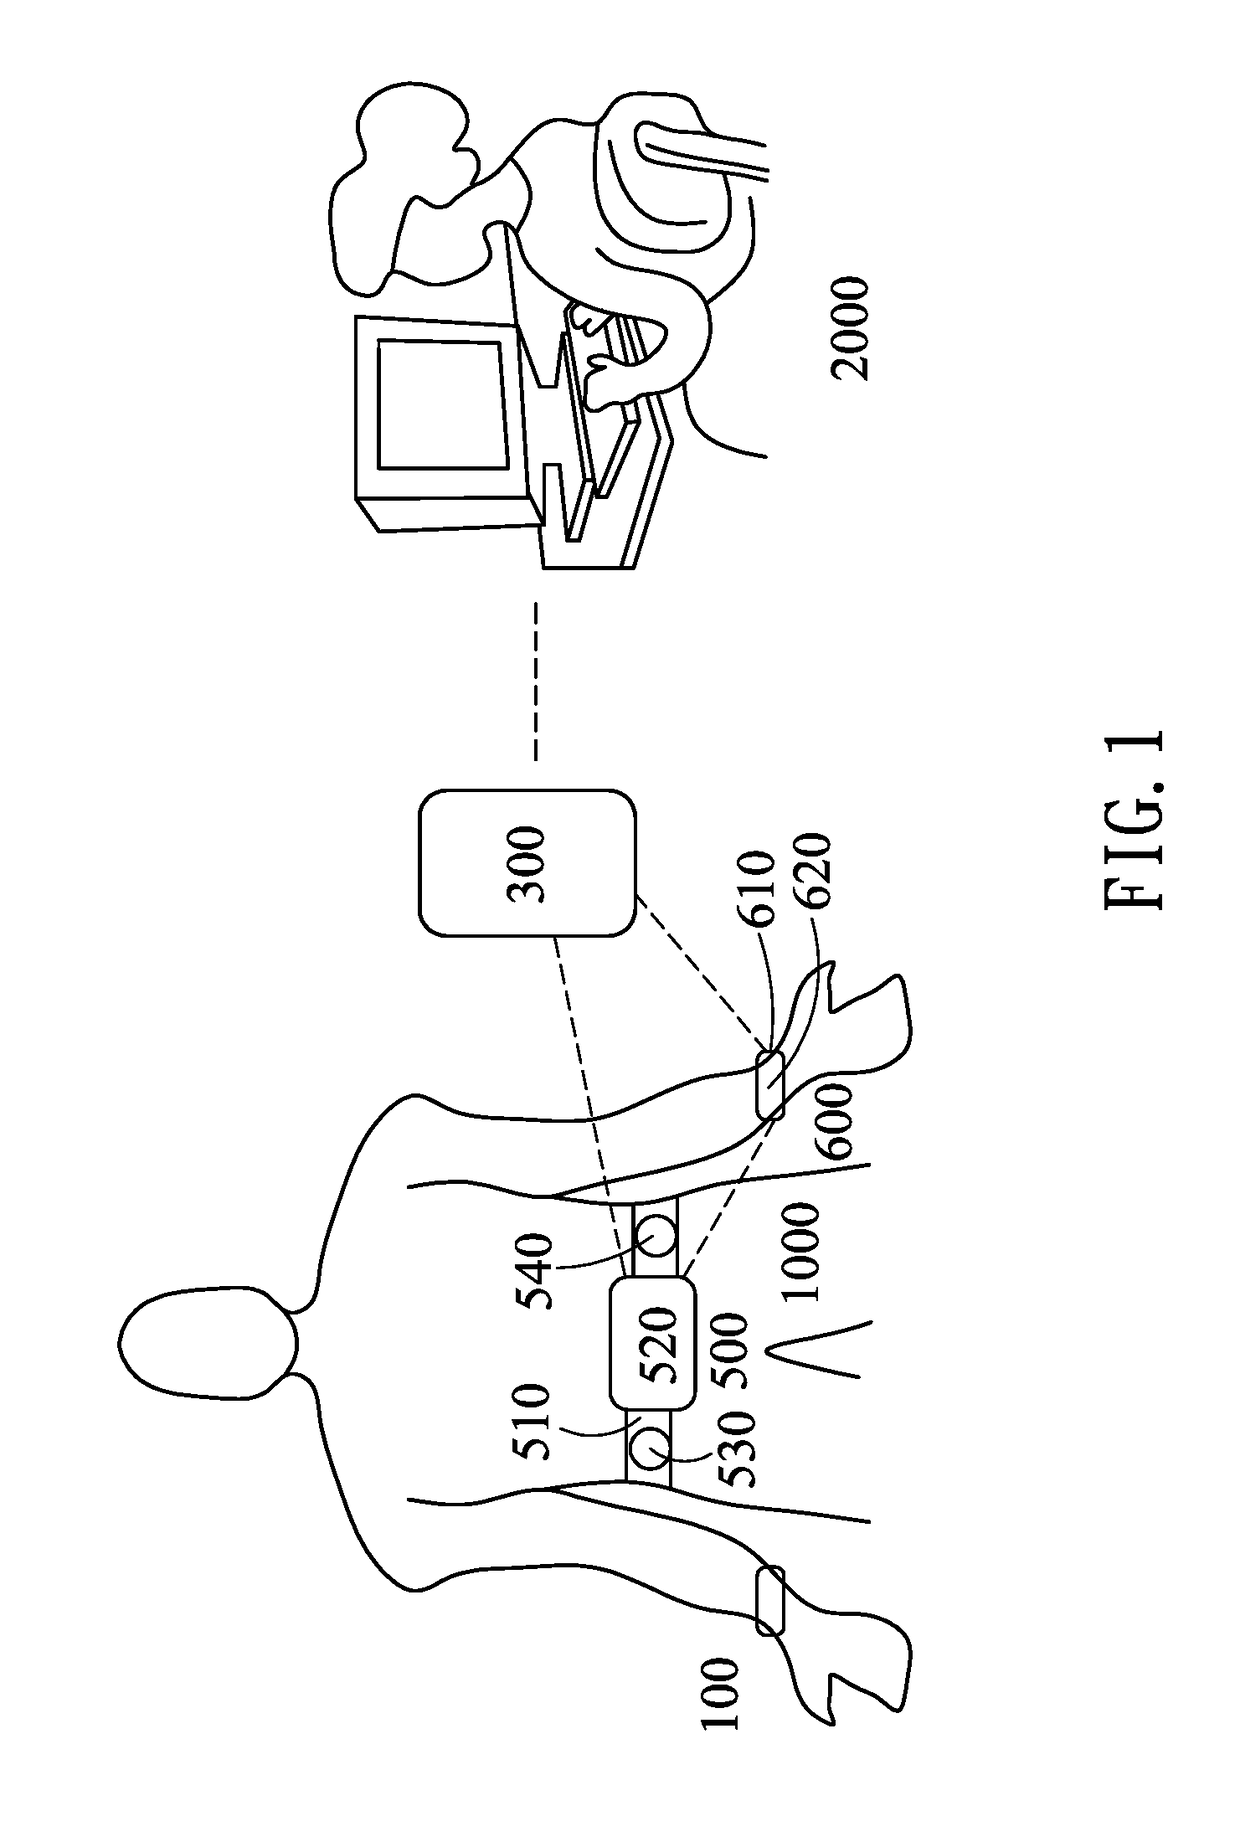 Wearable physiological measuring device